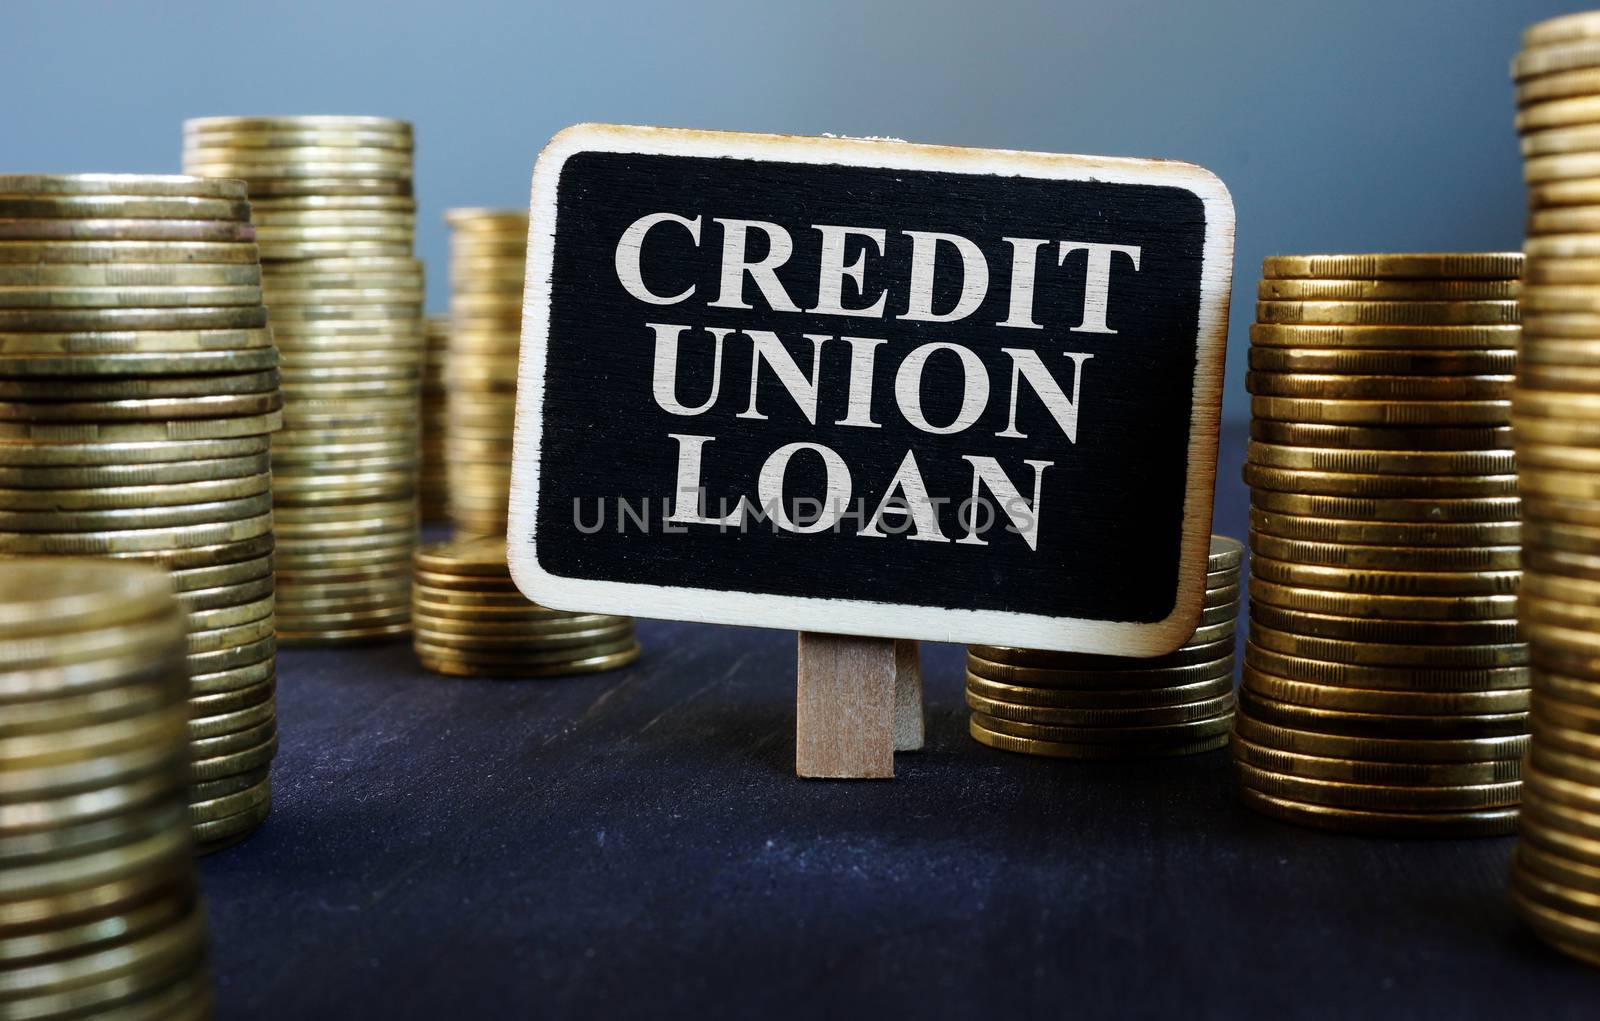 Credit union loan sign on wooden plate and money. by designer491